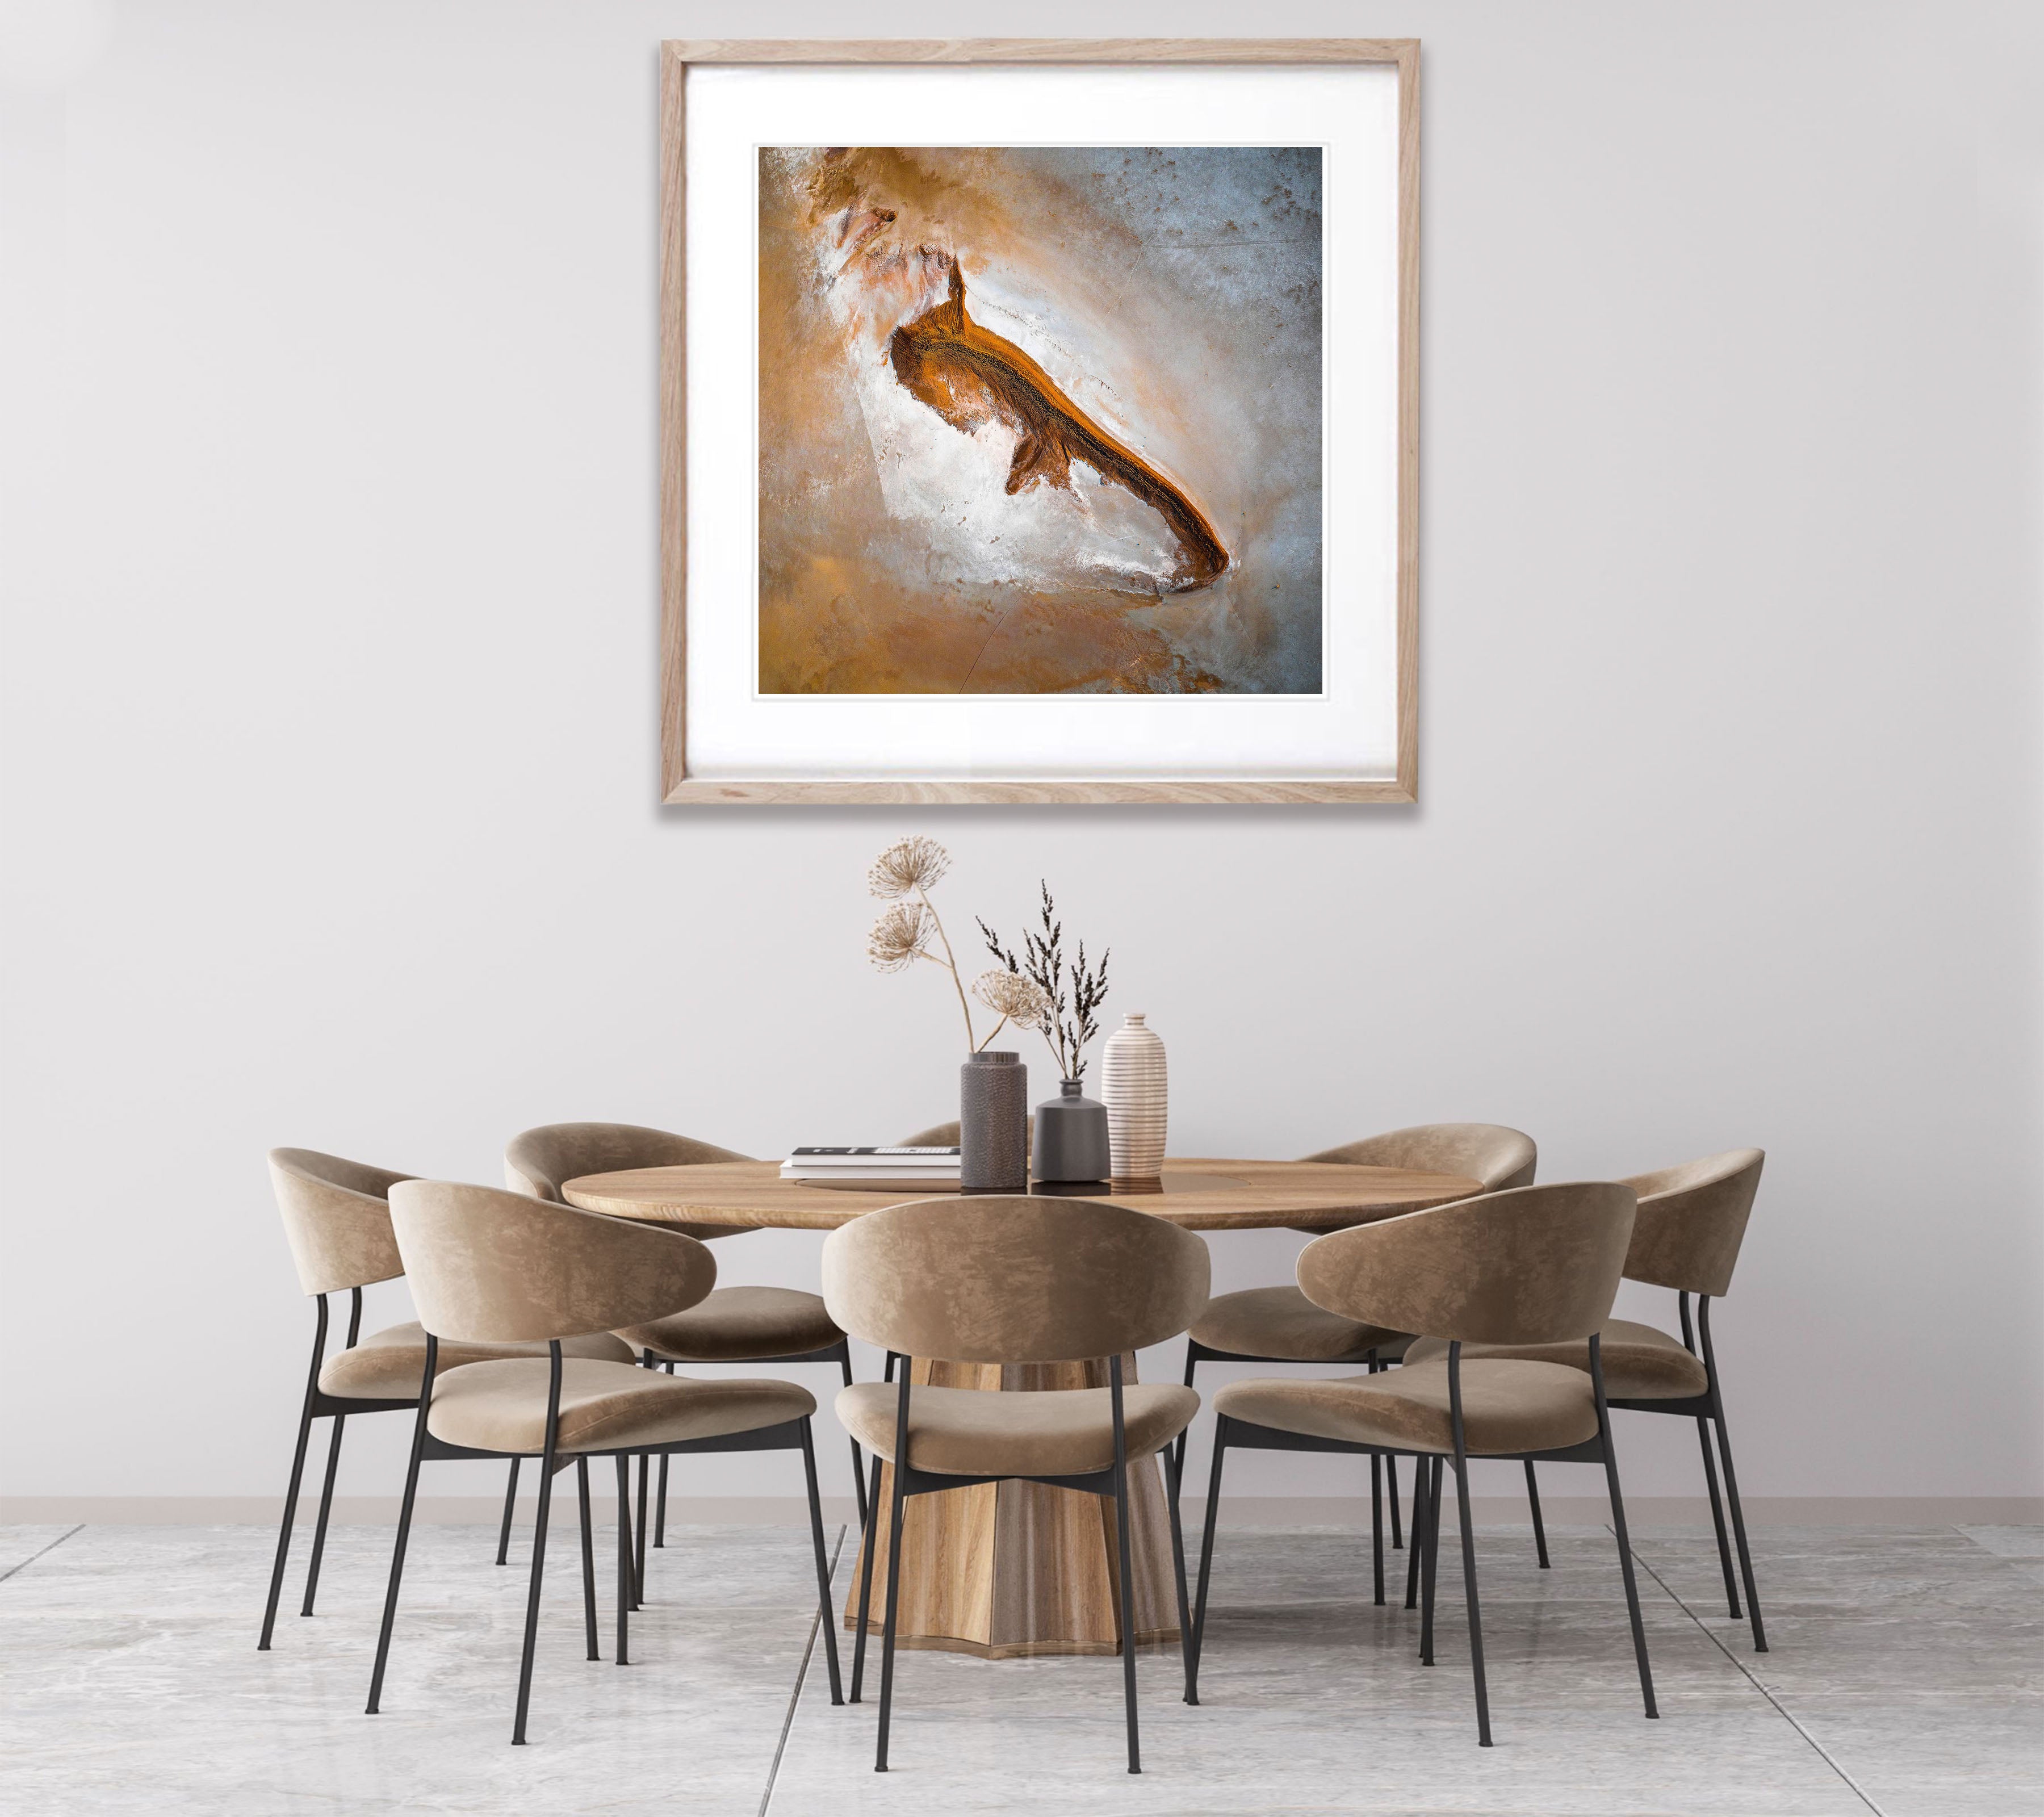 ARTWORK INSTOCK - 'Amphibian' - Available 150 x 150cms Mounted Print (ready to frame) in the gallery TODAY!